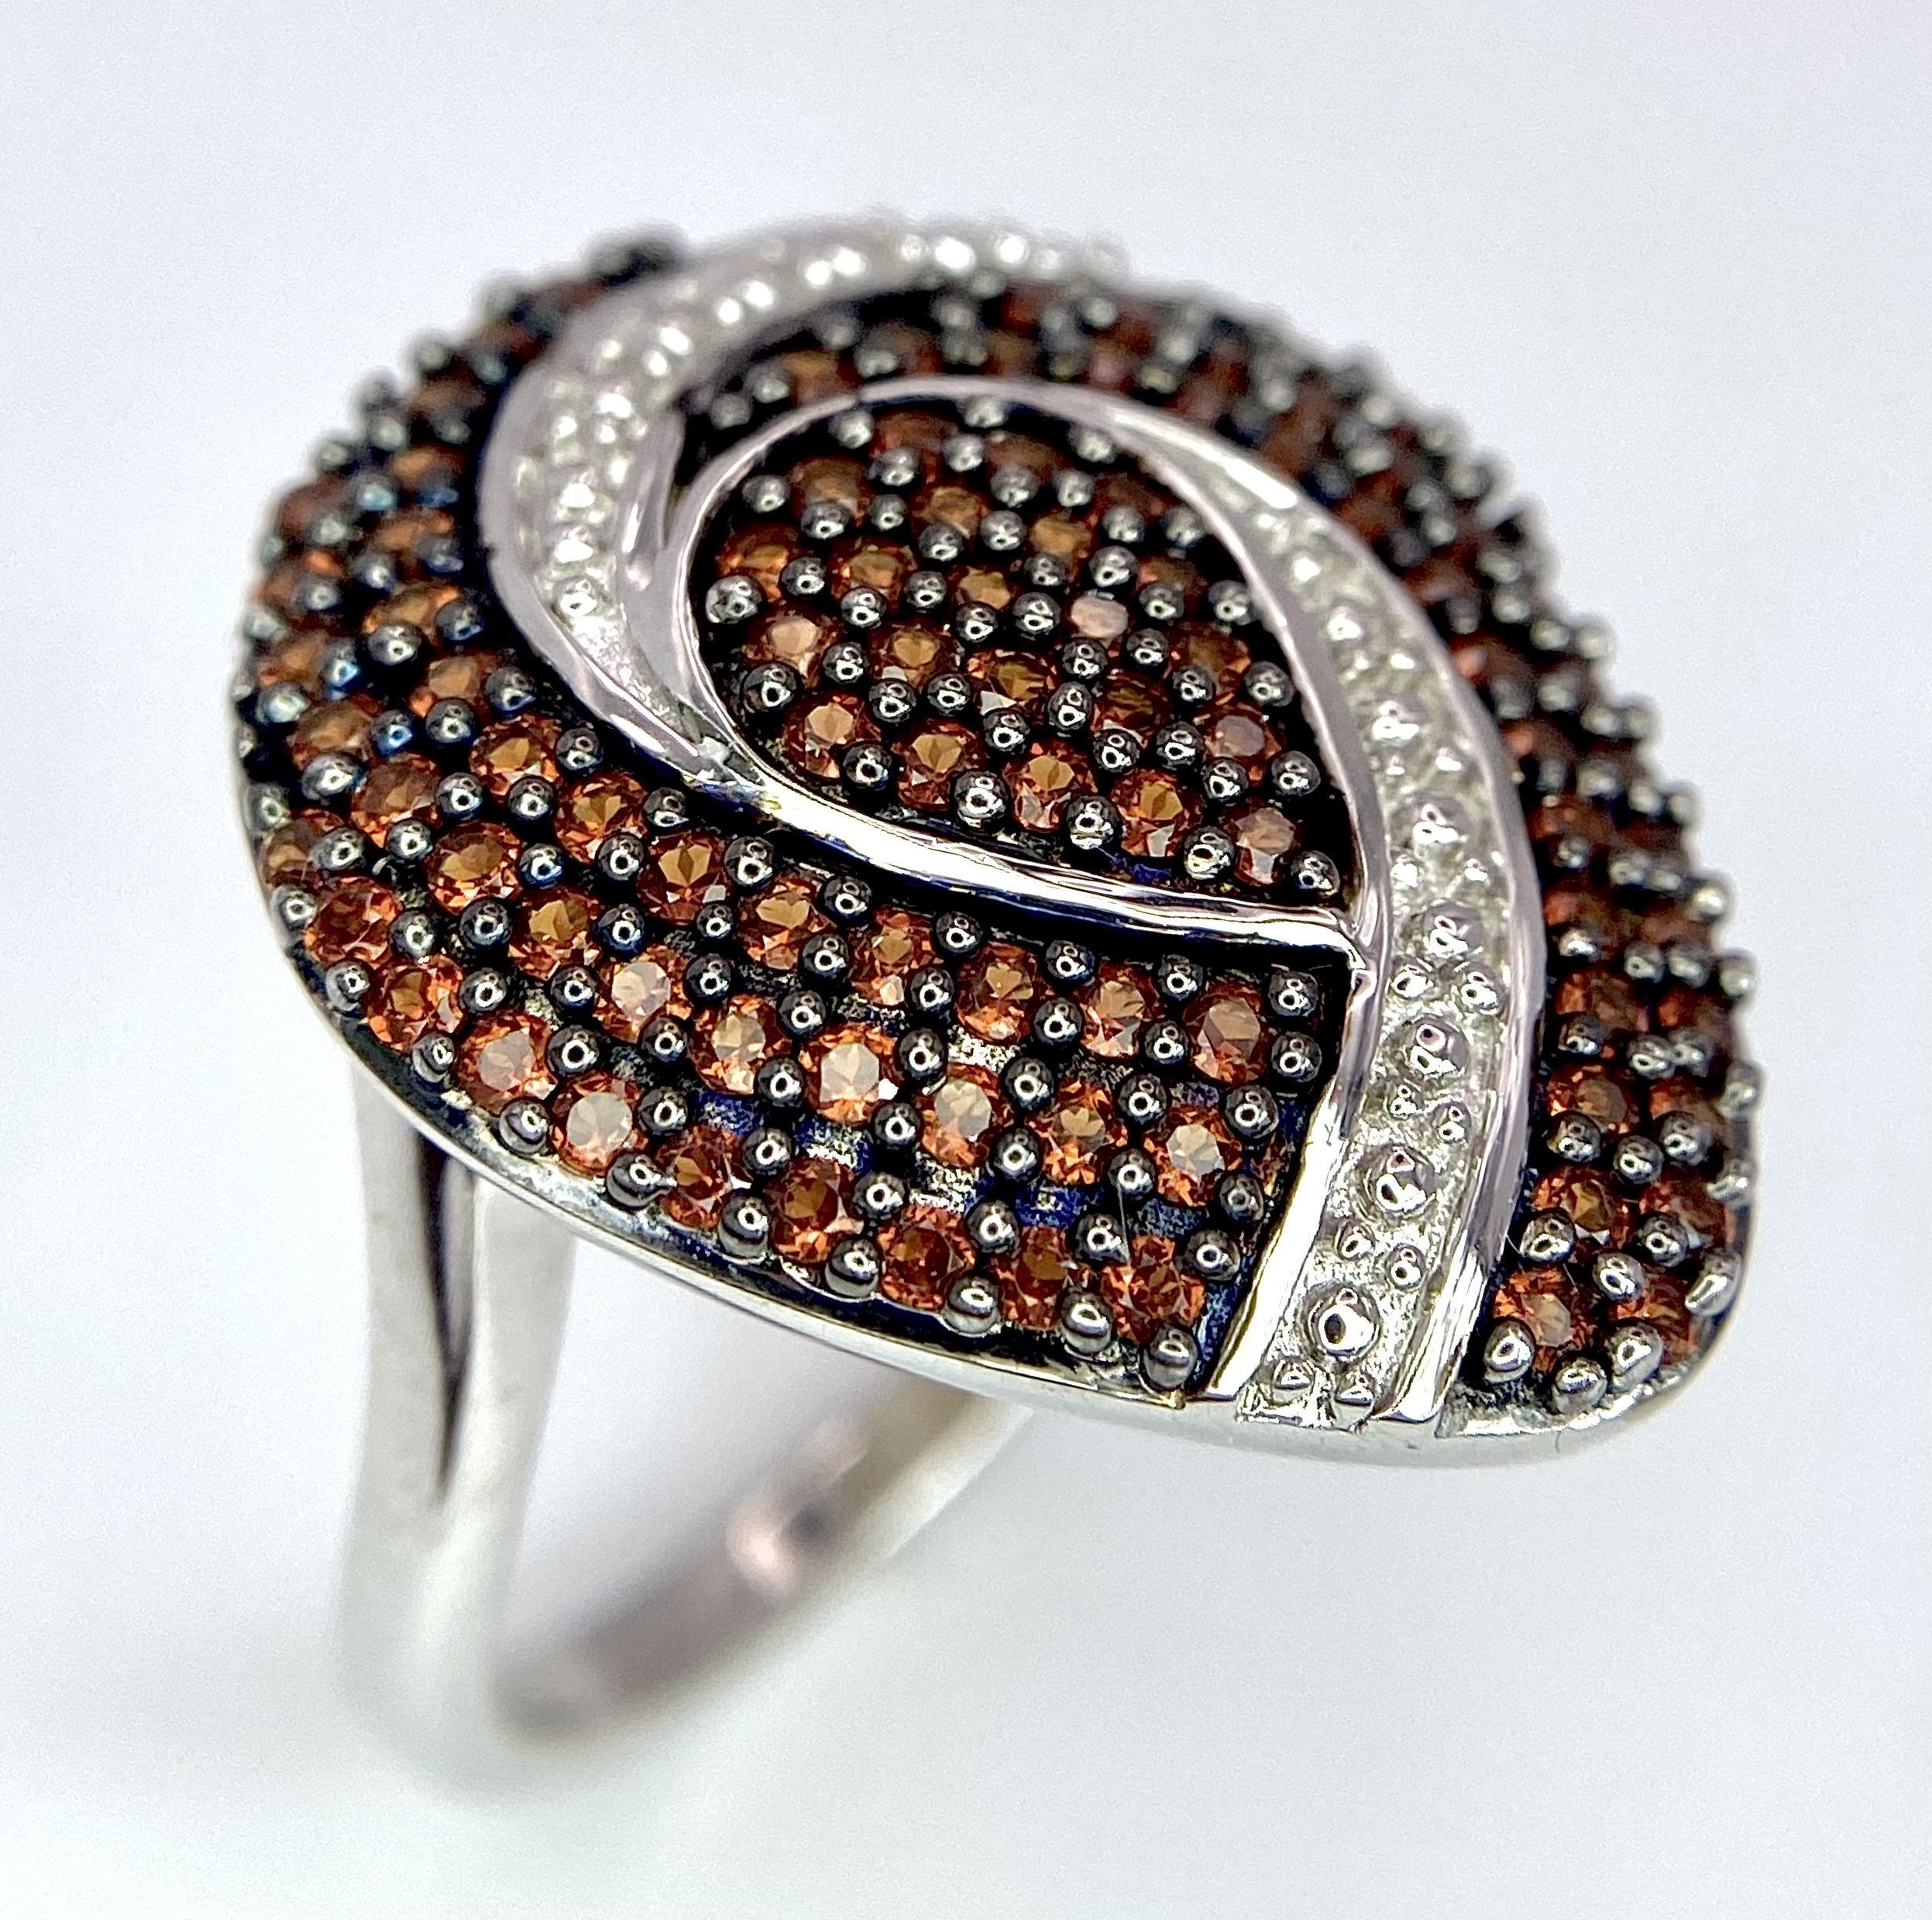 A Stunning, Unworn, Fully Certified Limited Edition (1 of 50), Sterling Silver and Anthill Garnet